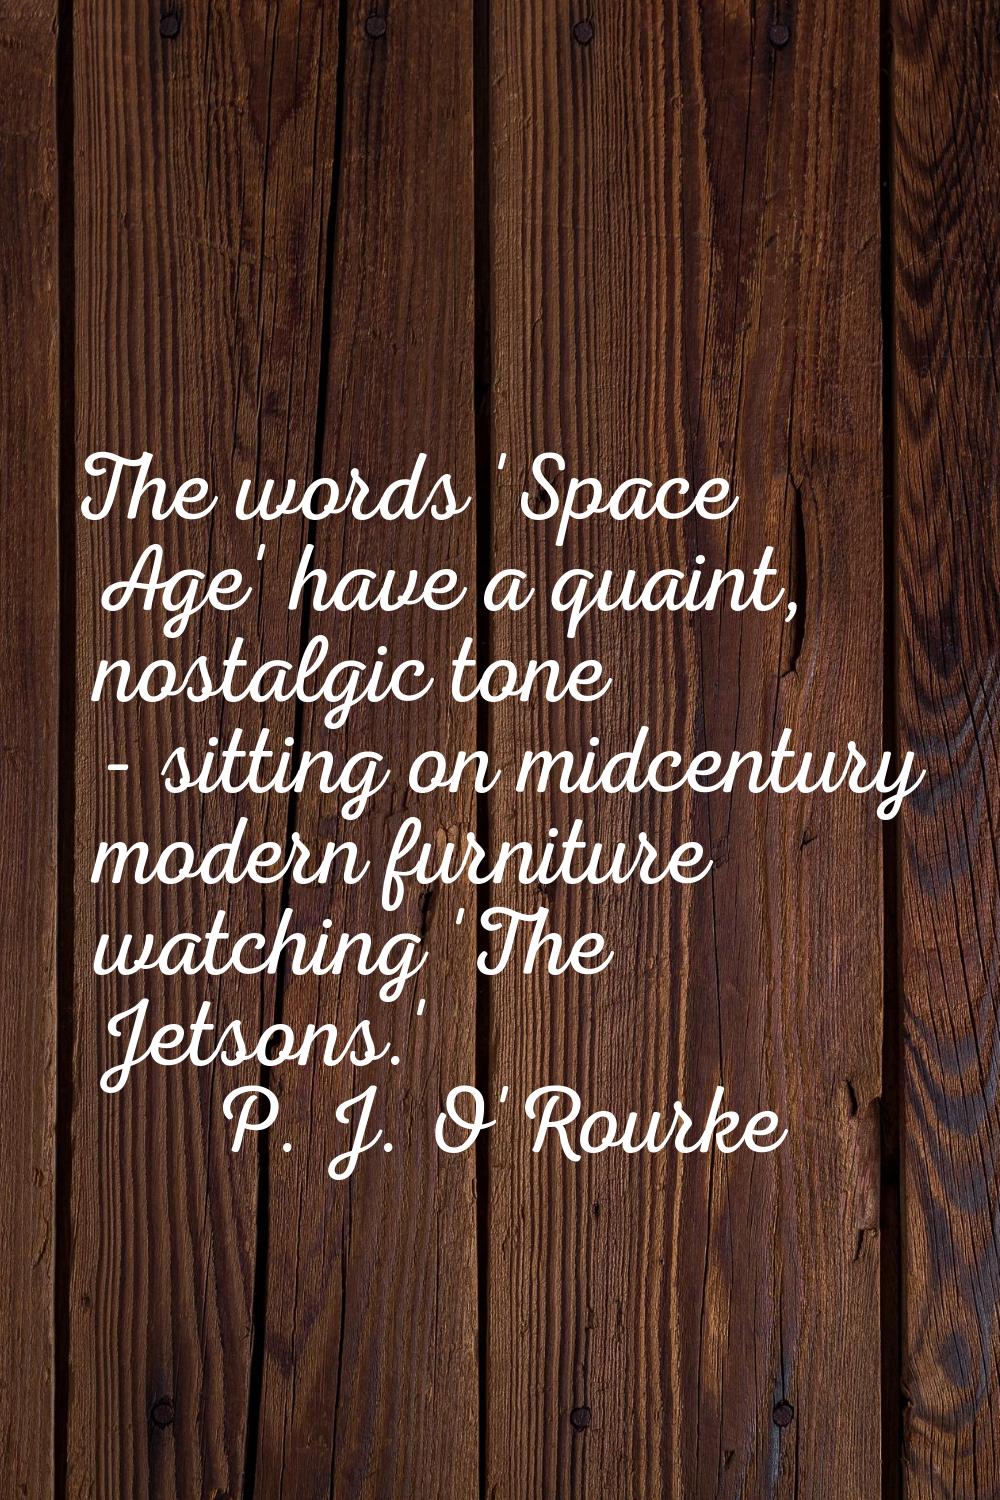 The words 'Space Age' have a quaint, nostalgic tone - sitting on midcentury modern furniture watchi